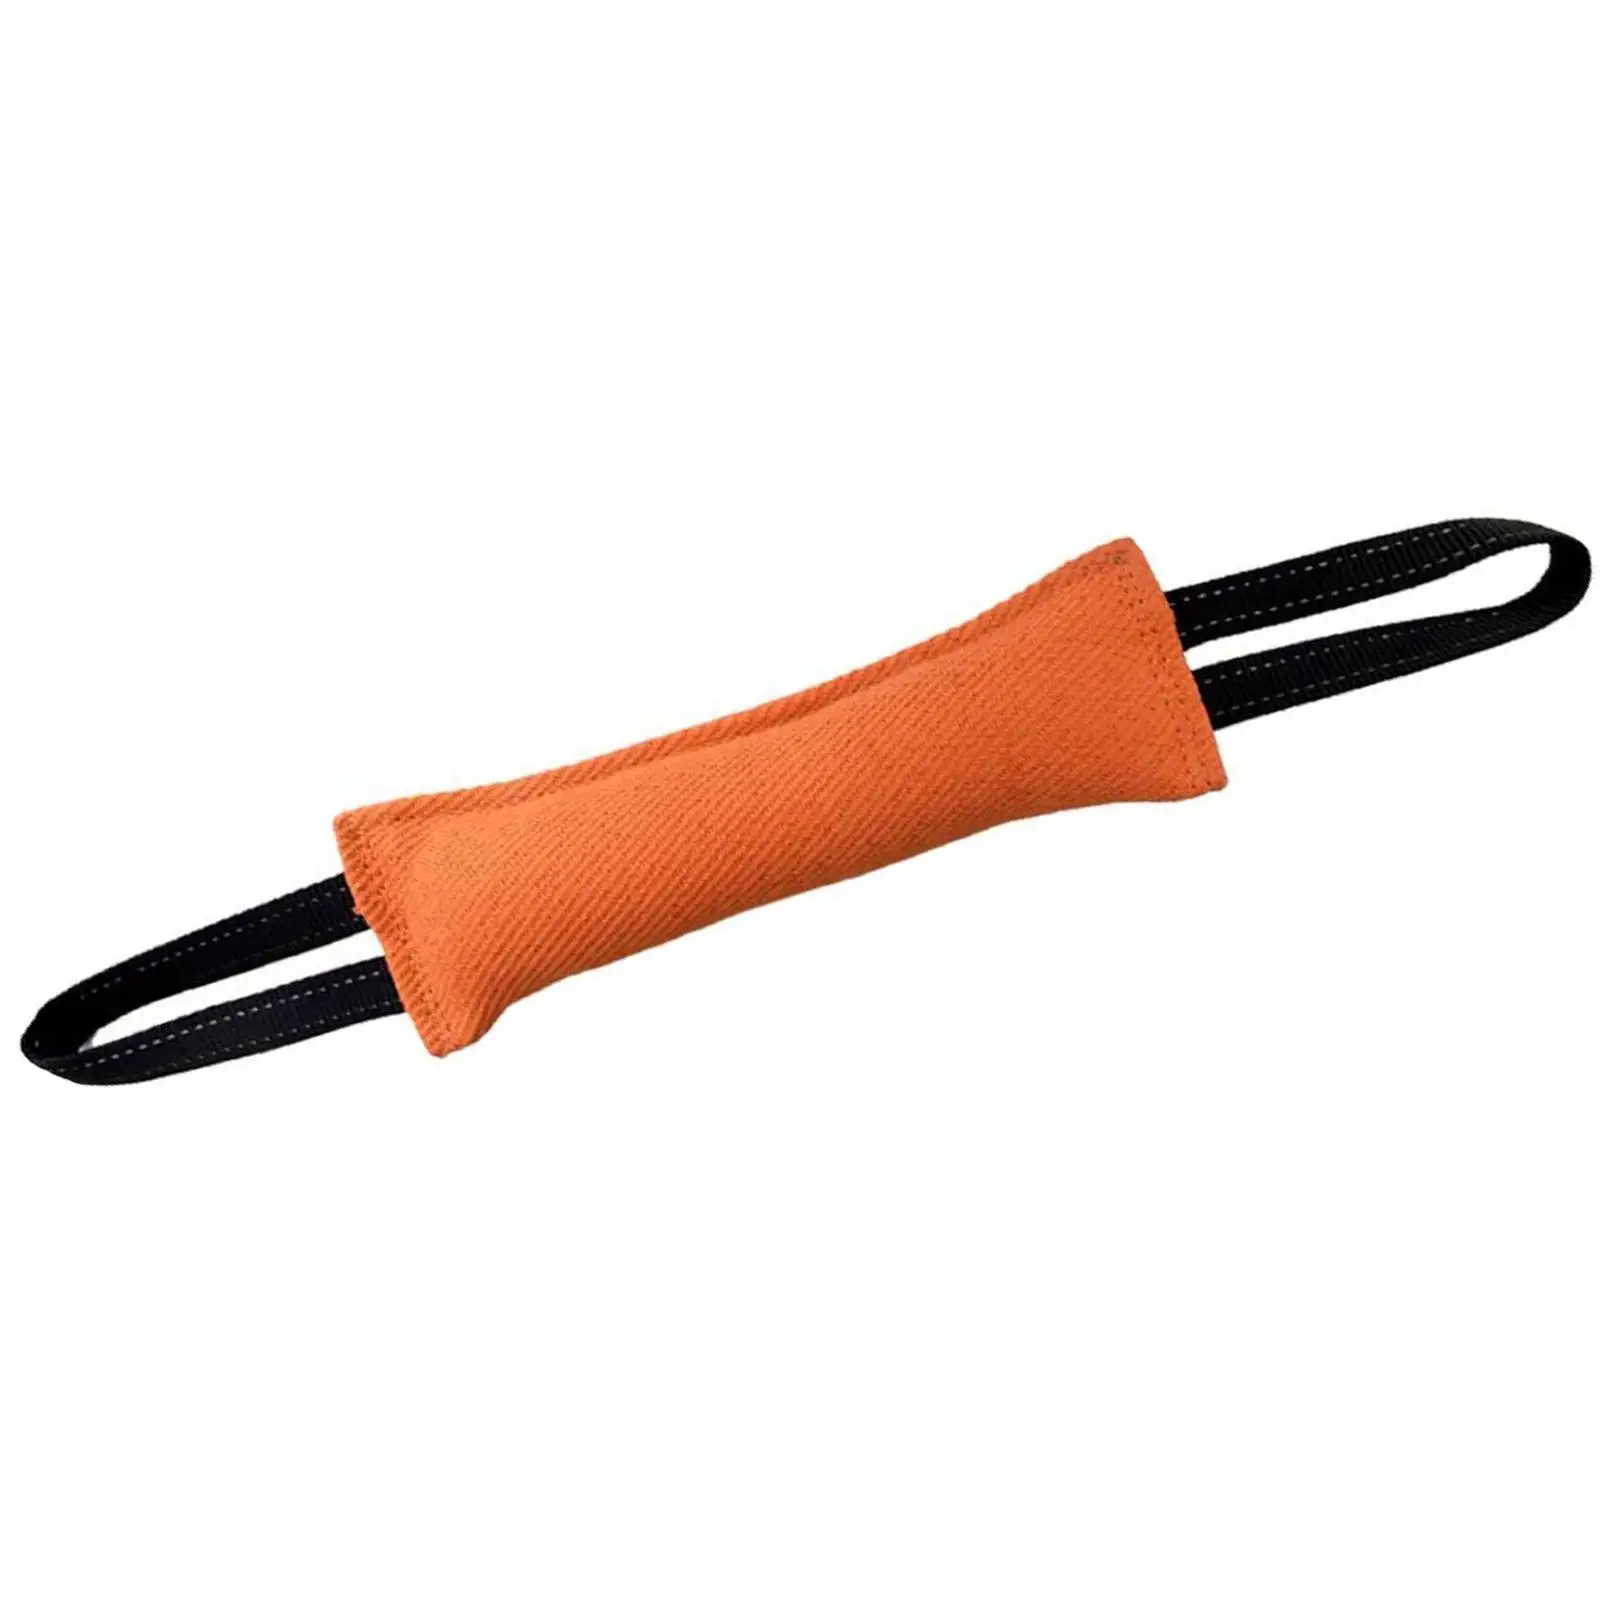 Dog Bite Tug Toy Pet Supplies Durable 2 Handles Training Bite Pillow for Aggressive Chewers Pitbull Puppy Absorb Tug of War